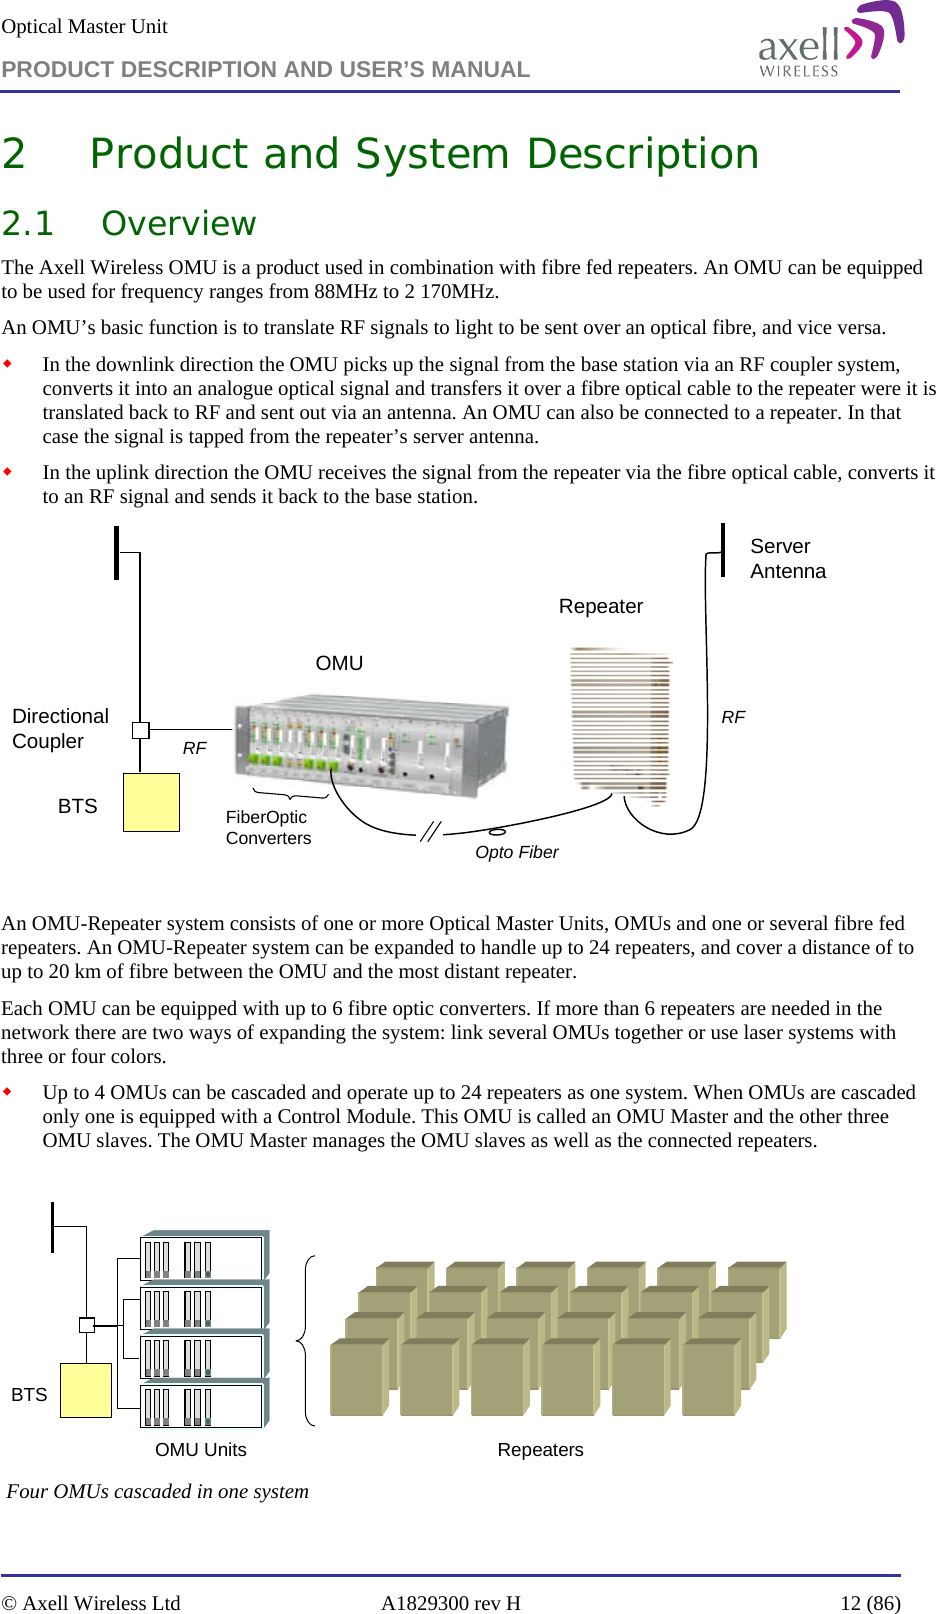 Optical Master Unit PRODUCT DESCRIPTION AND USER’S MANUAL   © Axell Wireless Ltd  A1829300 rev H  12 (86)  2 Product and System Description 2.1 Overview The Axell Wireless OMU is a product used in combination with fibre fed repeaters. An OMU can be equipped to be used for frequency ranges from 88MHz to 2 170MHz.  An OMU’s basic function is to translate RF signals to light to be sent over an optical fibre, and vice versa.   In the downlink direction the OMU picks up the signal from the base station via an RF coupler system, converts it into an analogue optical signal and transfers it over a fibre optical cable to the repeater were it is translated back to RF and sent out via an antenna. An OMU can also be connected to a repeater. In that case the signal is tapped from the repeater’s server antenna.  In the uplink direction the OMU receives the signal from the repeater via the fibre optical cable, converts it to an RF signal and sends it back to the base station.  BTSDirectional CouplerRFOMURepeaterOpto FiberRFFiberOpticConvertersServer Antenna  An OMU-Repeater system consists of one or more Optical Master Units, OMUs and one or several fibre fed repeaters. An OMU-Repeater system can be expanded to handle up to 24 repeaters, and cover a distance of to up to 20 km of fibre between the OMU and the most distant repeater.  Each OMU can be equipped with up to 6 fibre optic converters. If more than 6 repeaters are needed in the network there are two ways of expanding the system: link several OMUs together or use laser systems with three or four colors.   Up to 4 OMUs can be cascaded and operate up to 24 repeaters as one system. When OMUs are cascaded only one is equipped with a Control Module. This OMU is called an OMU Master and the other three OMU slaves. The OMU Master manages the OMU slaves as well as the connected repeaters.   BTSRepeatersOMU Units  Four OMUs cascaded in one system 